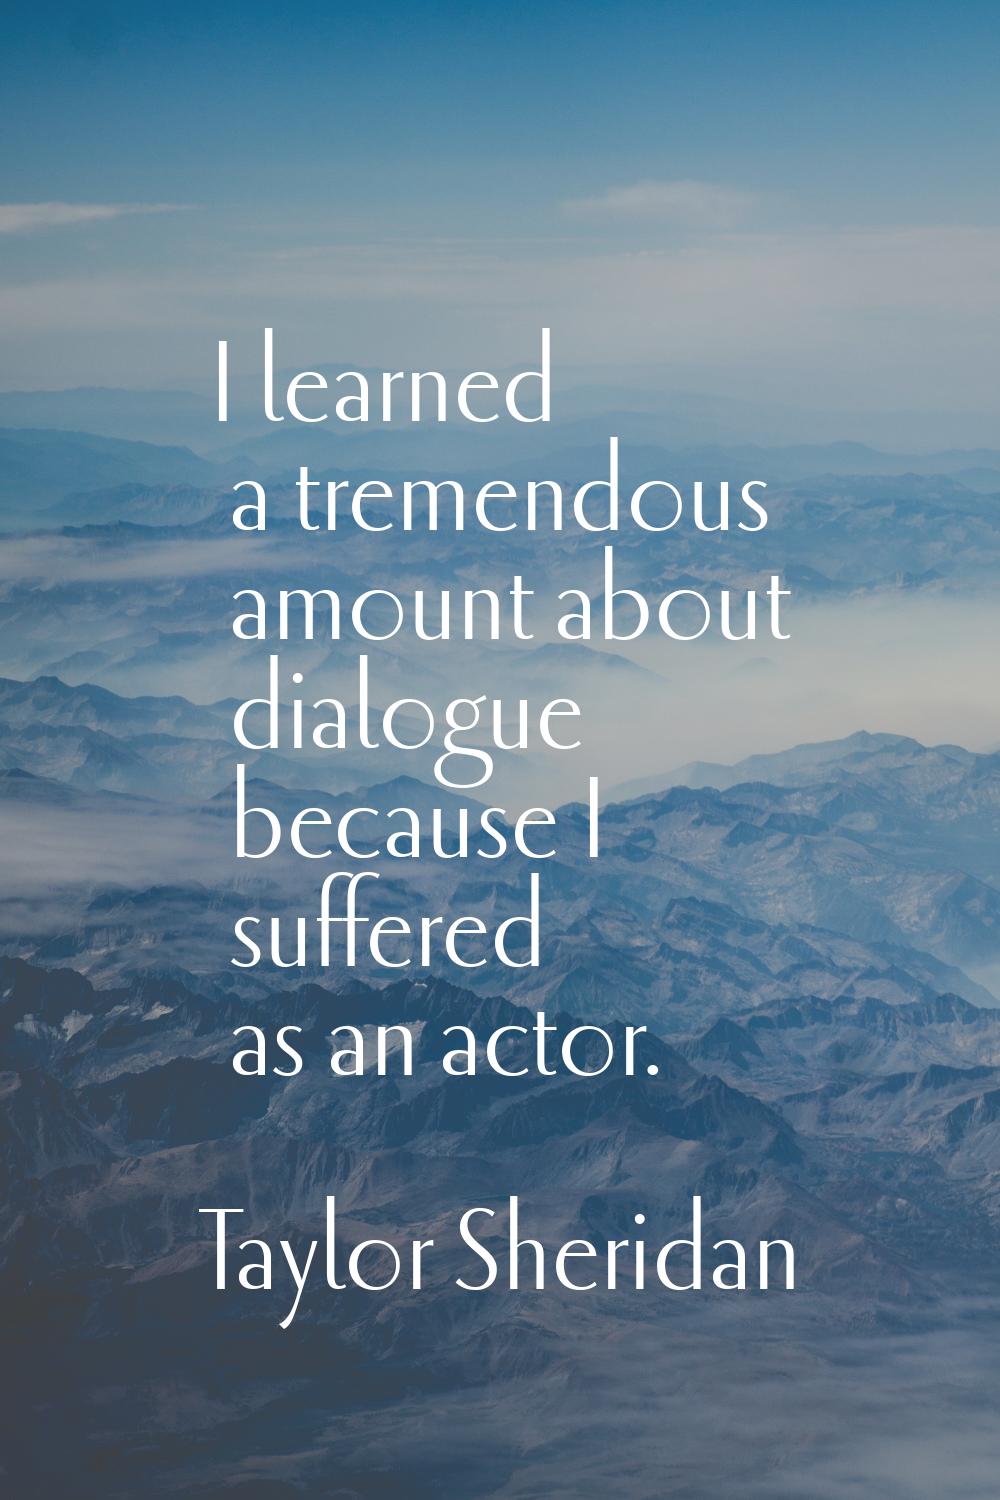 I learned a tremendous amount about dialogue because I suffered as an actor.